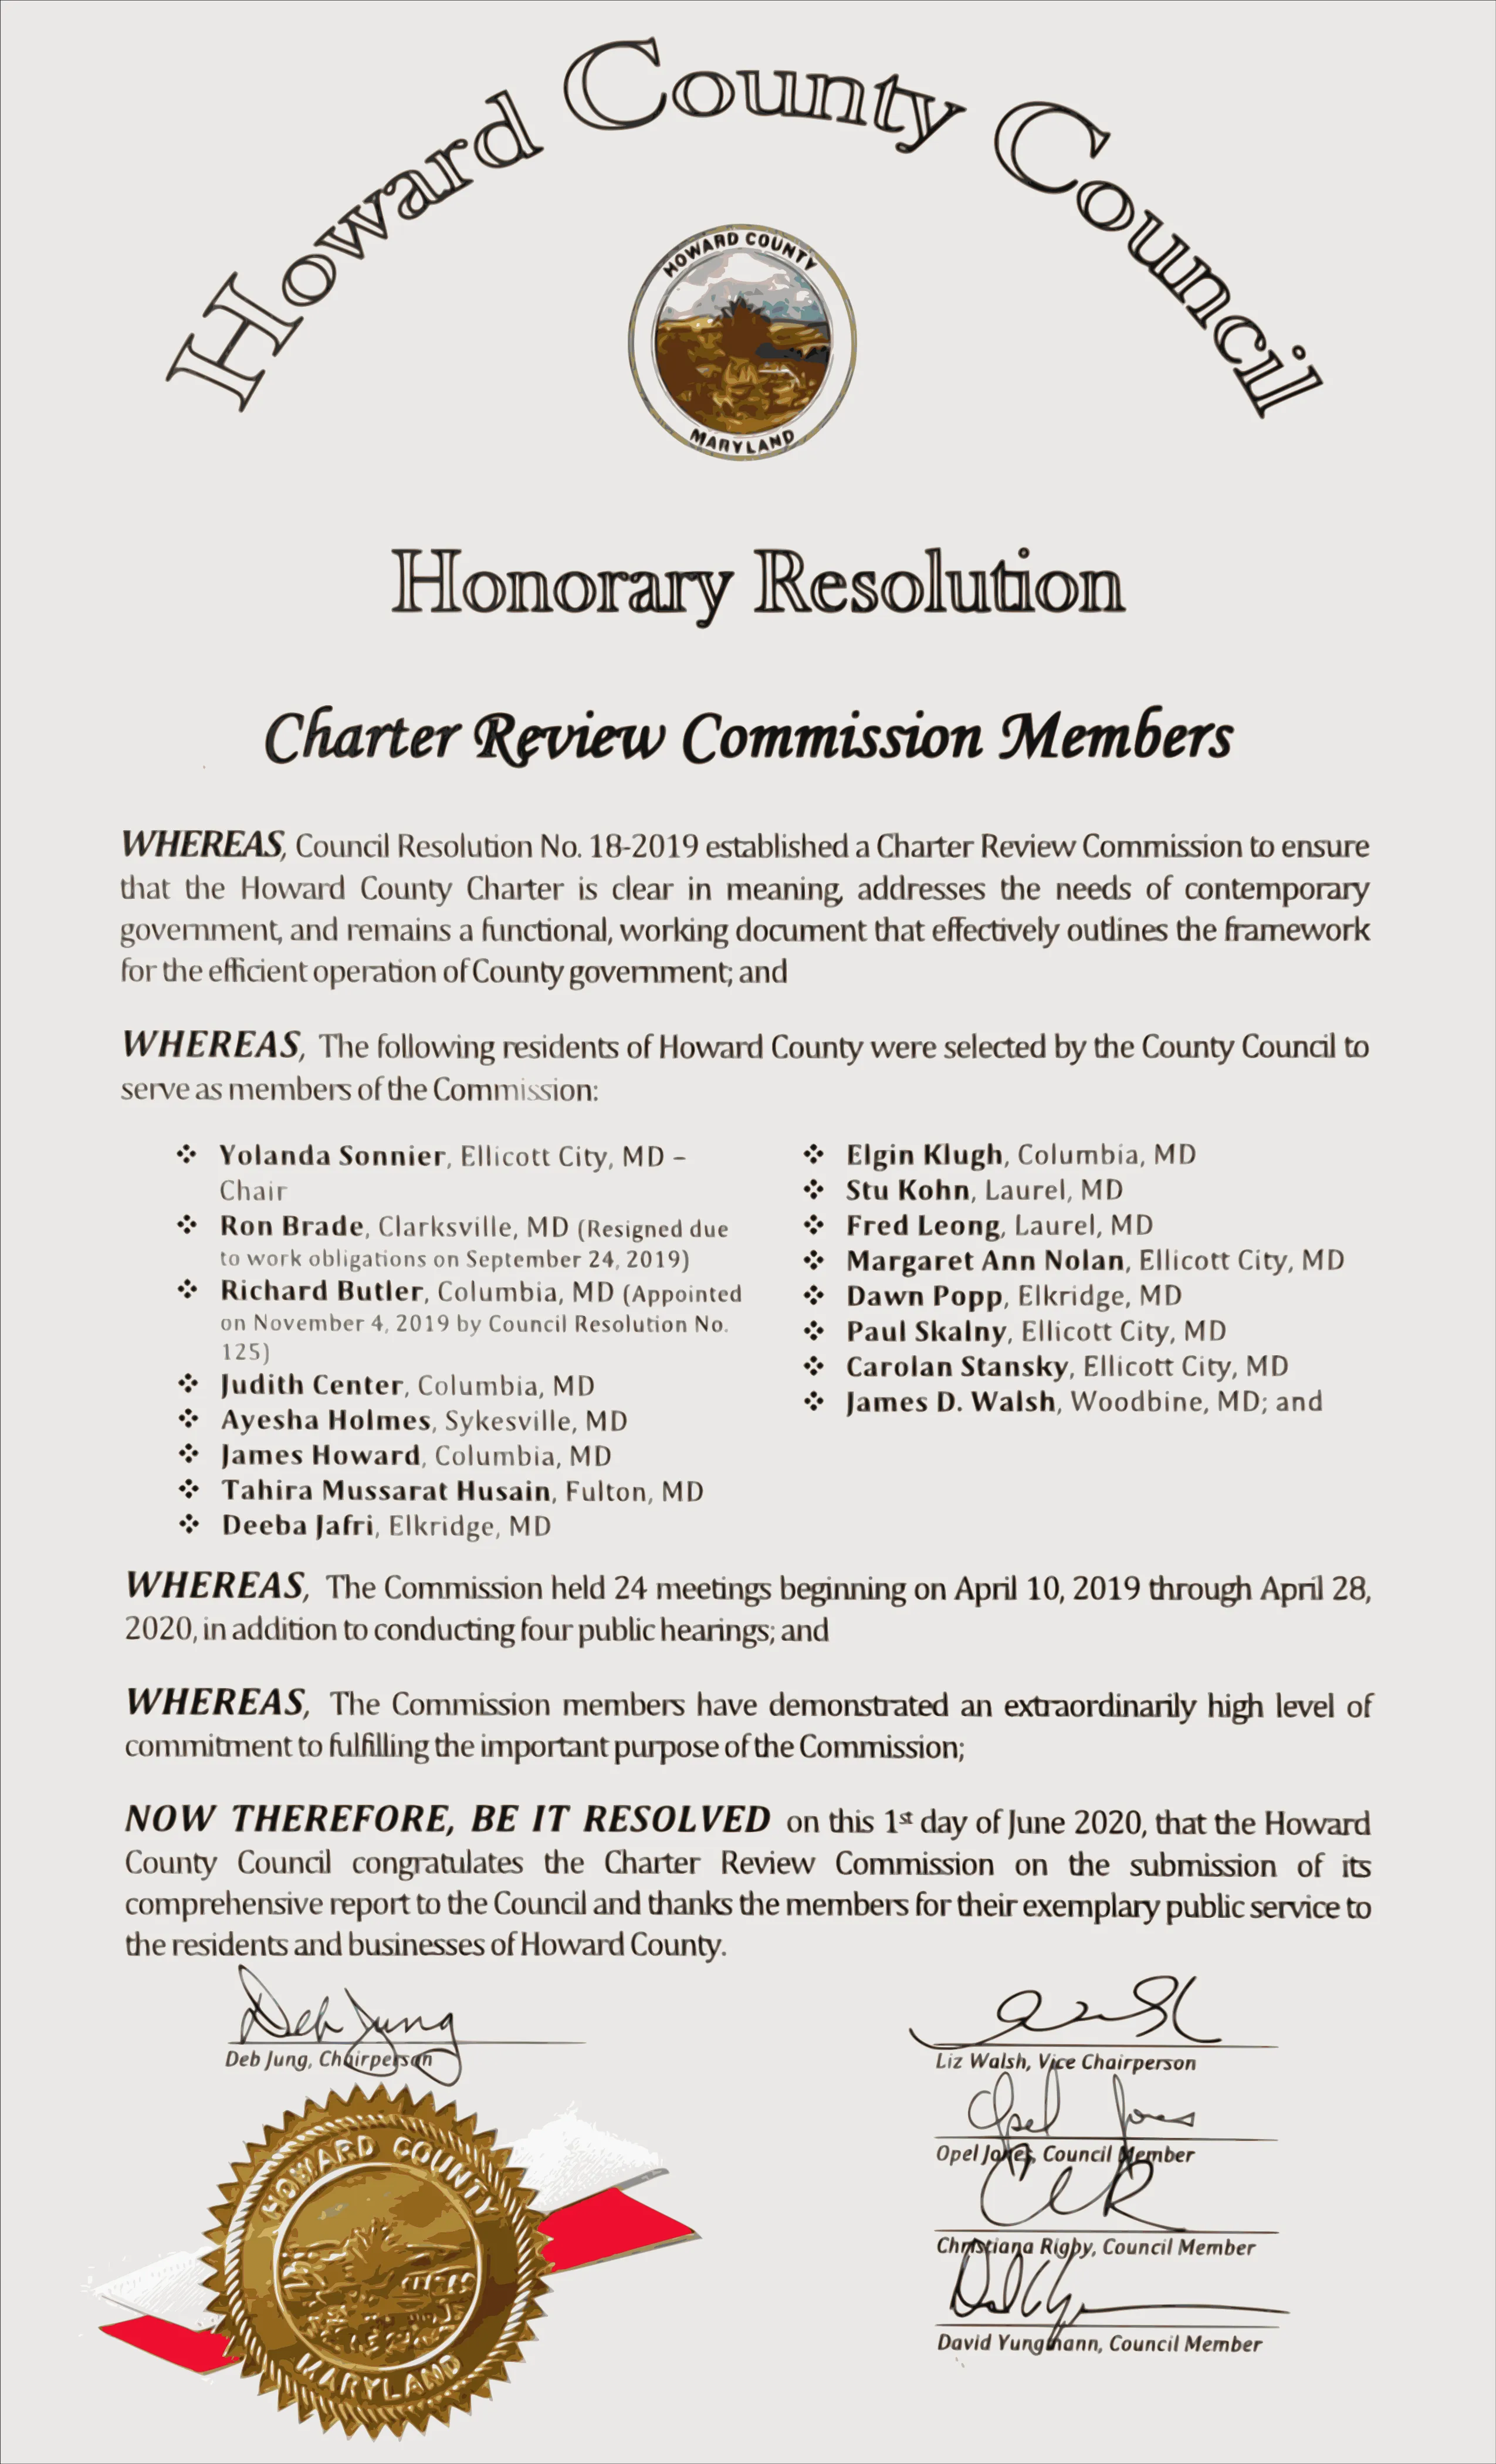 Honorary Resolution for the Charter Review Commission Members